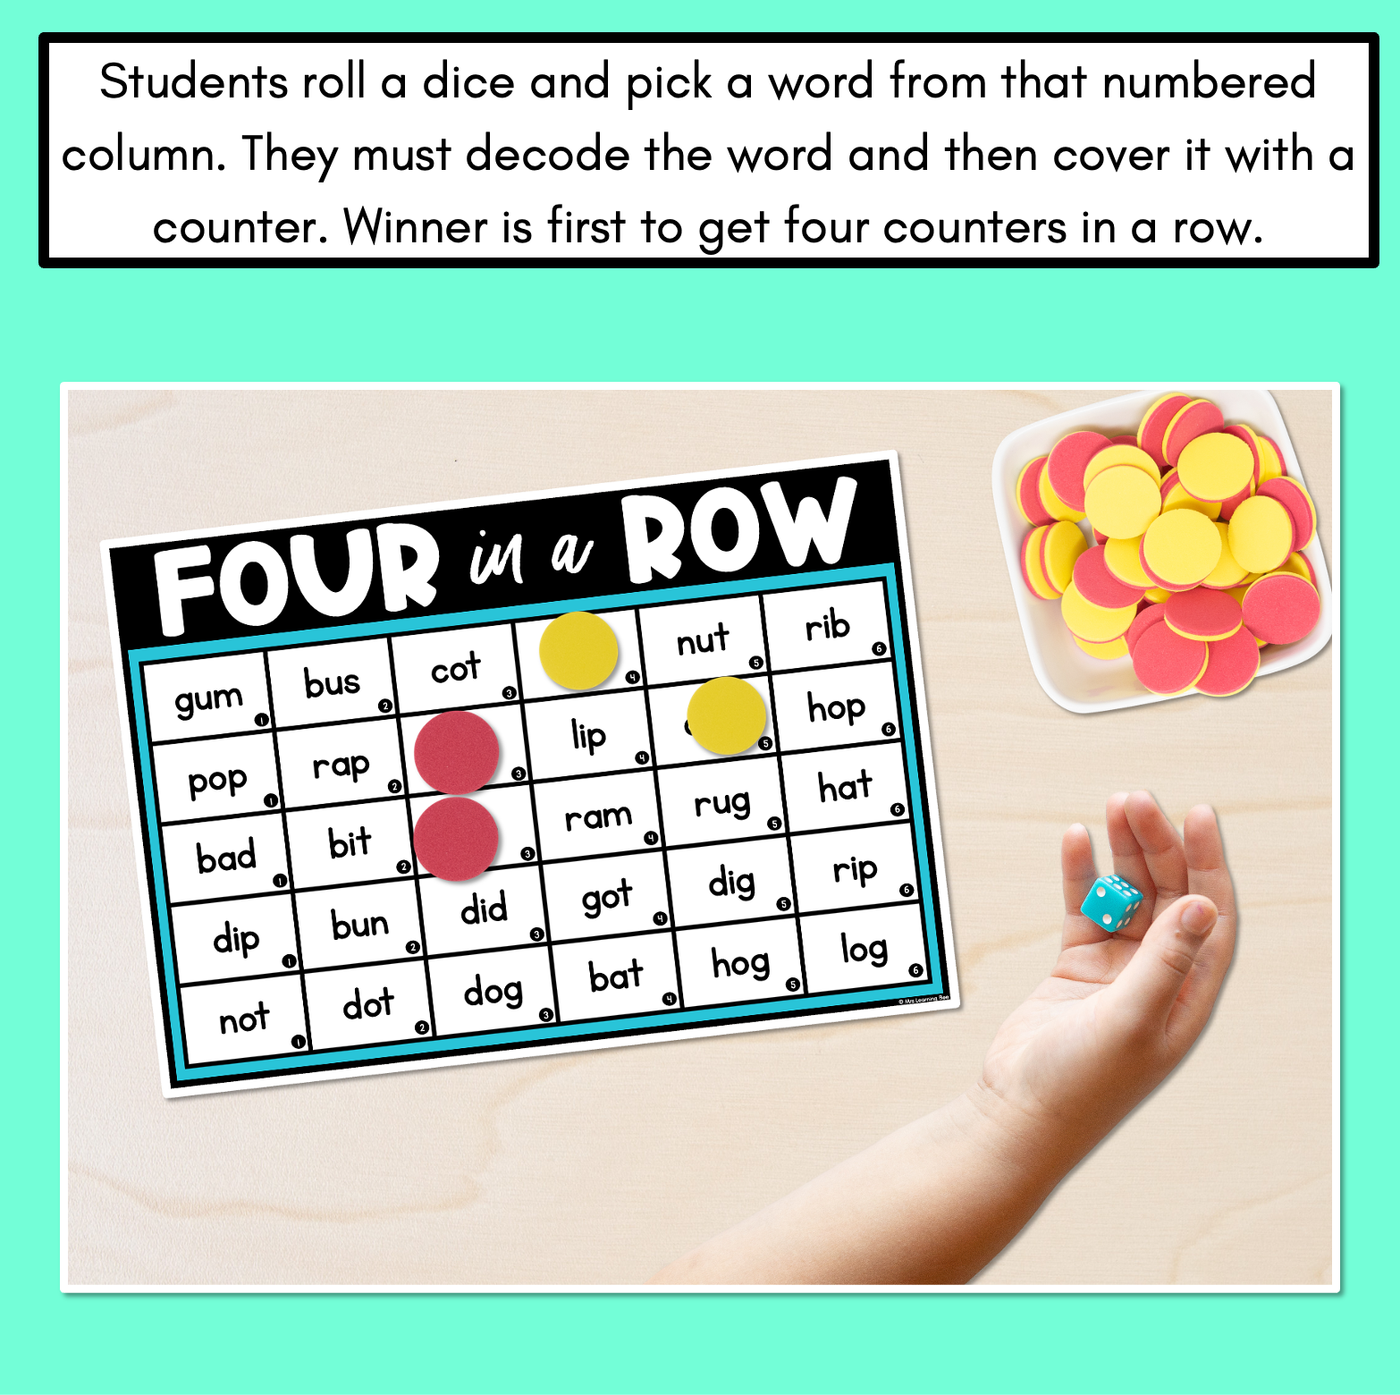 CVC Words Phonics Game - Four in A Row Decodable Words Activity